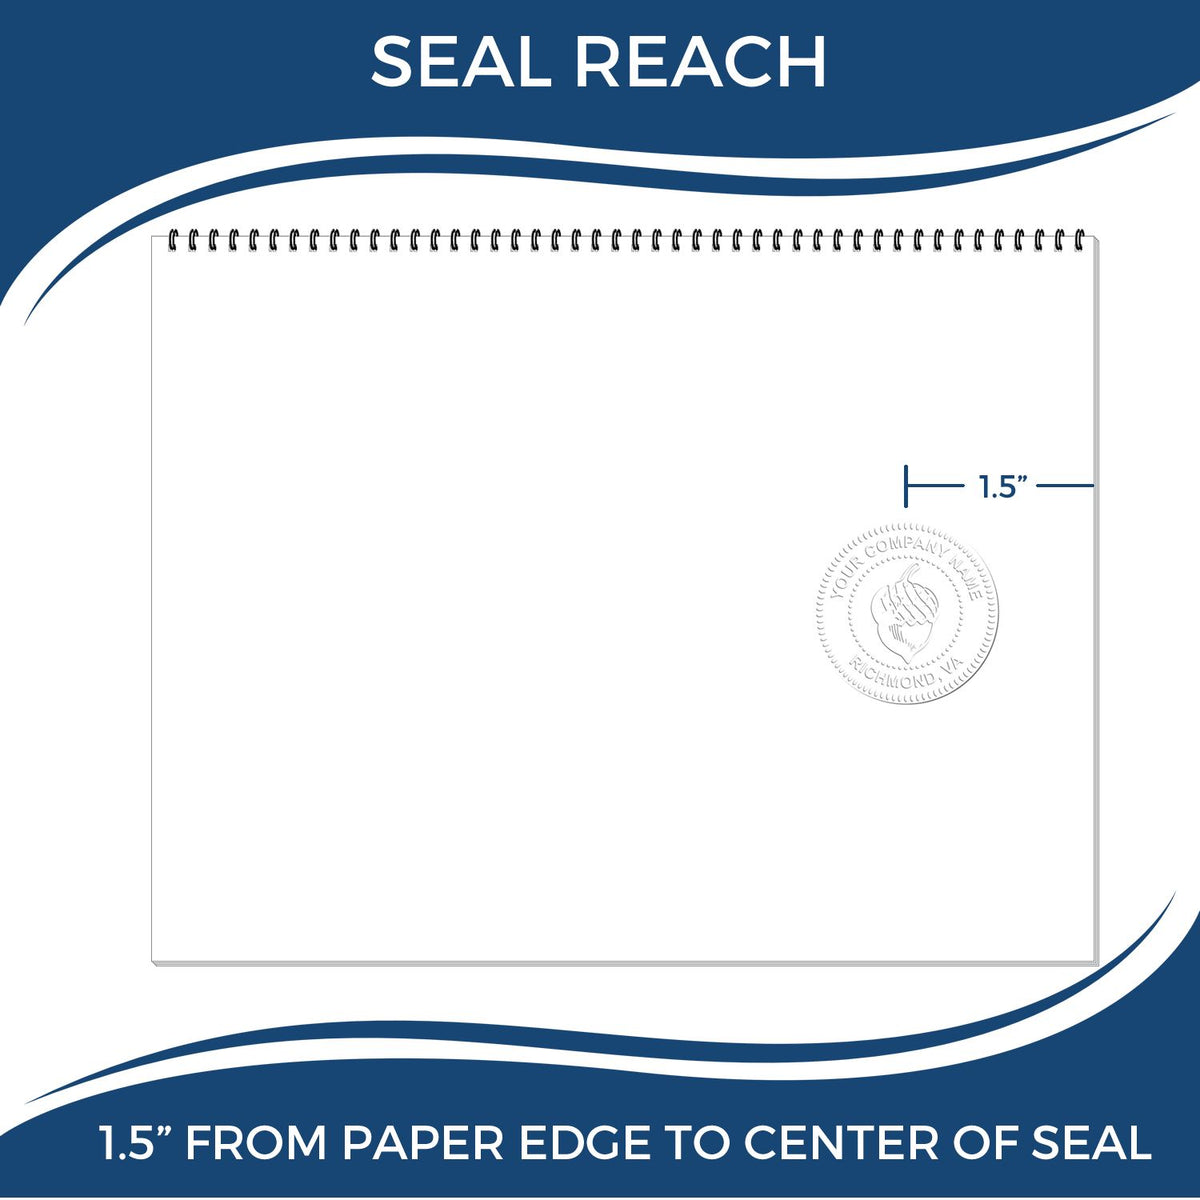 An infographic showing the seal reach which is represented by a ruler and a miniature seal image of the Soft Georgia Professional Geologist Seal